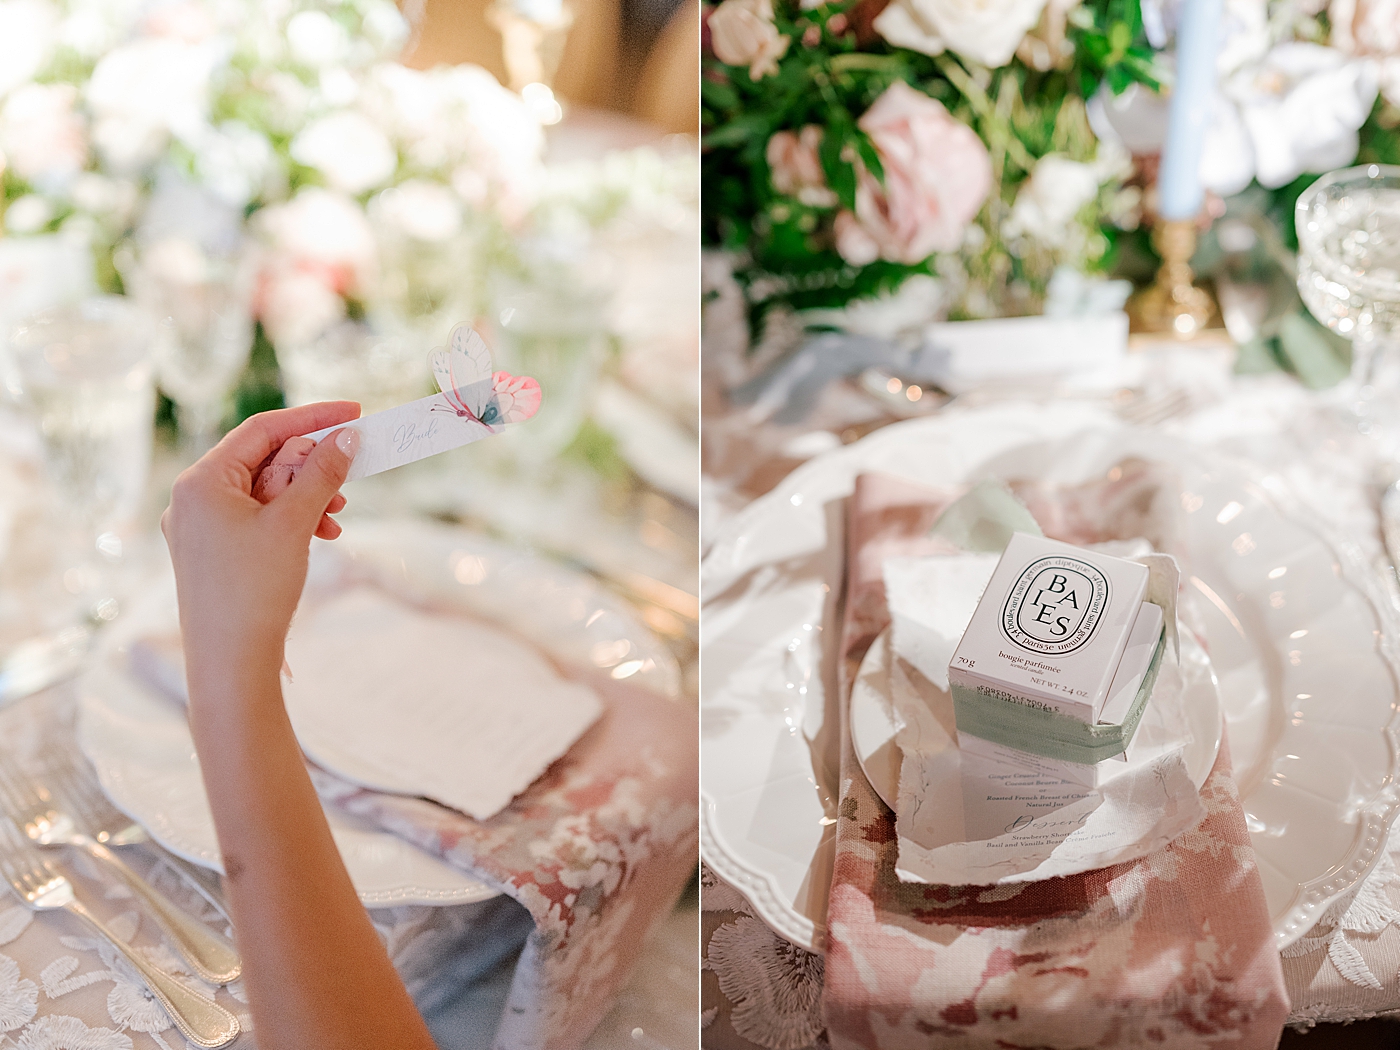 Bride holding place card and wedding favors | Image by Hope Helmuth Photography